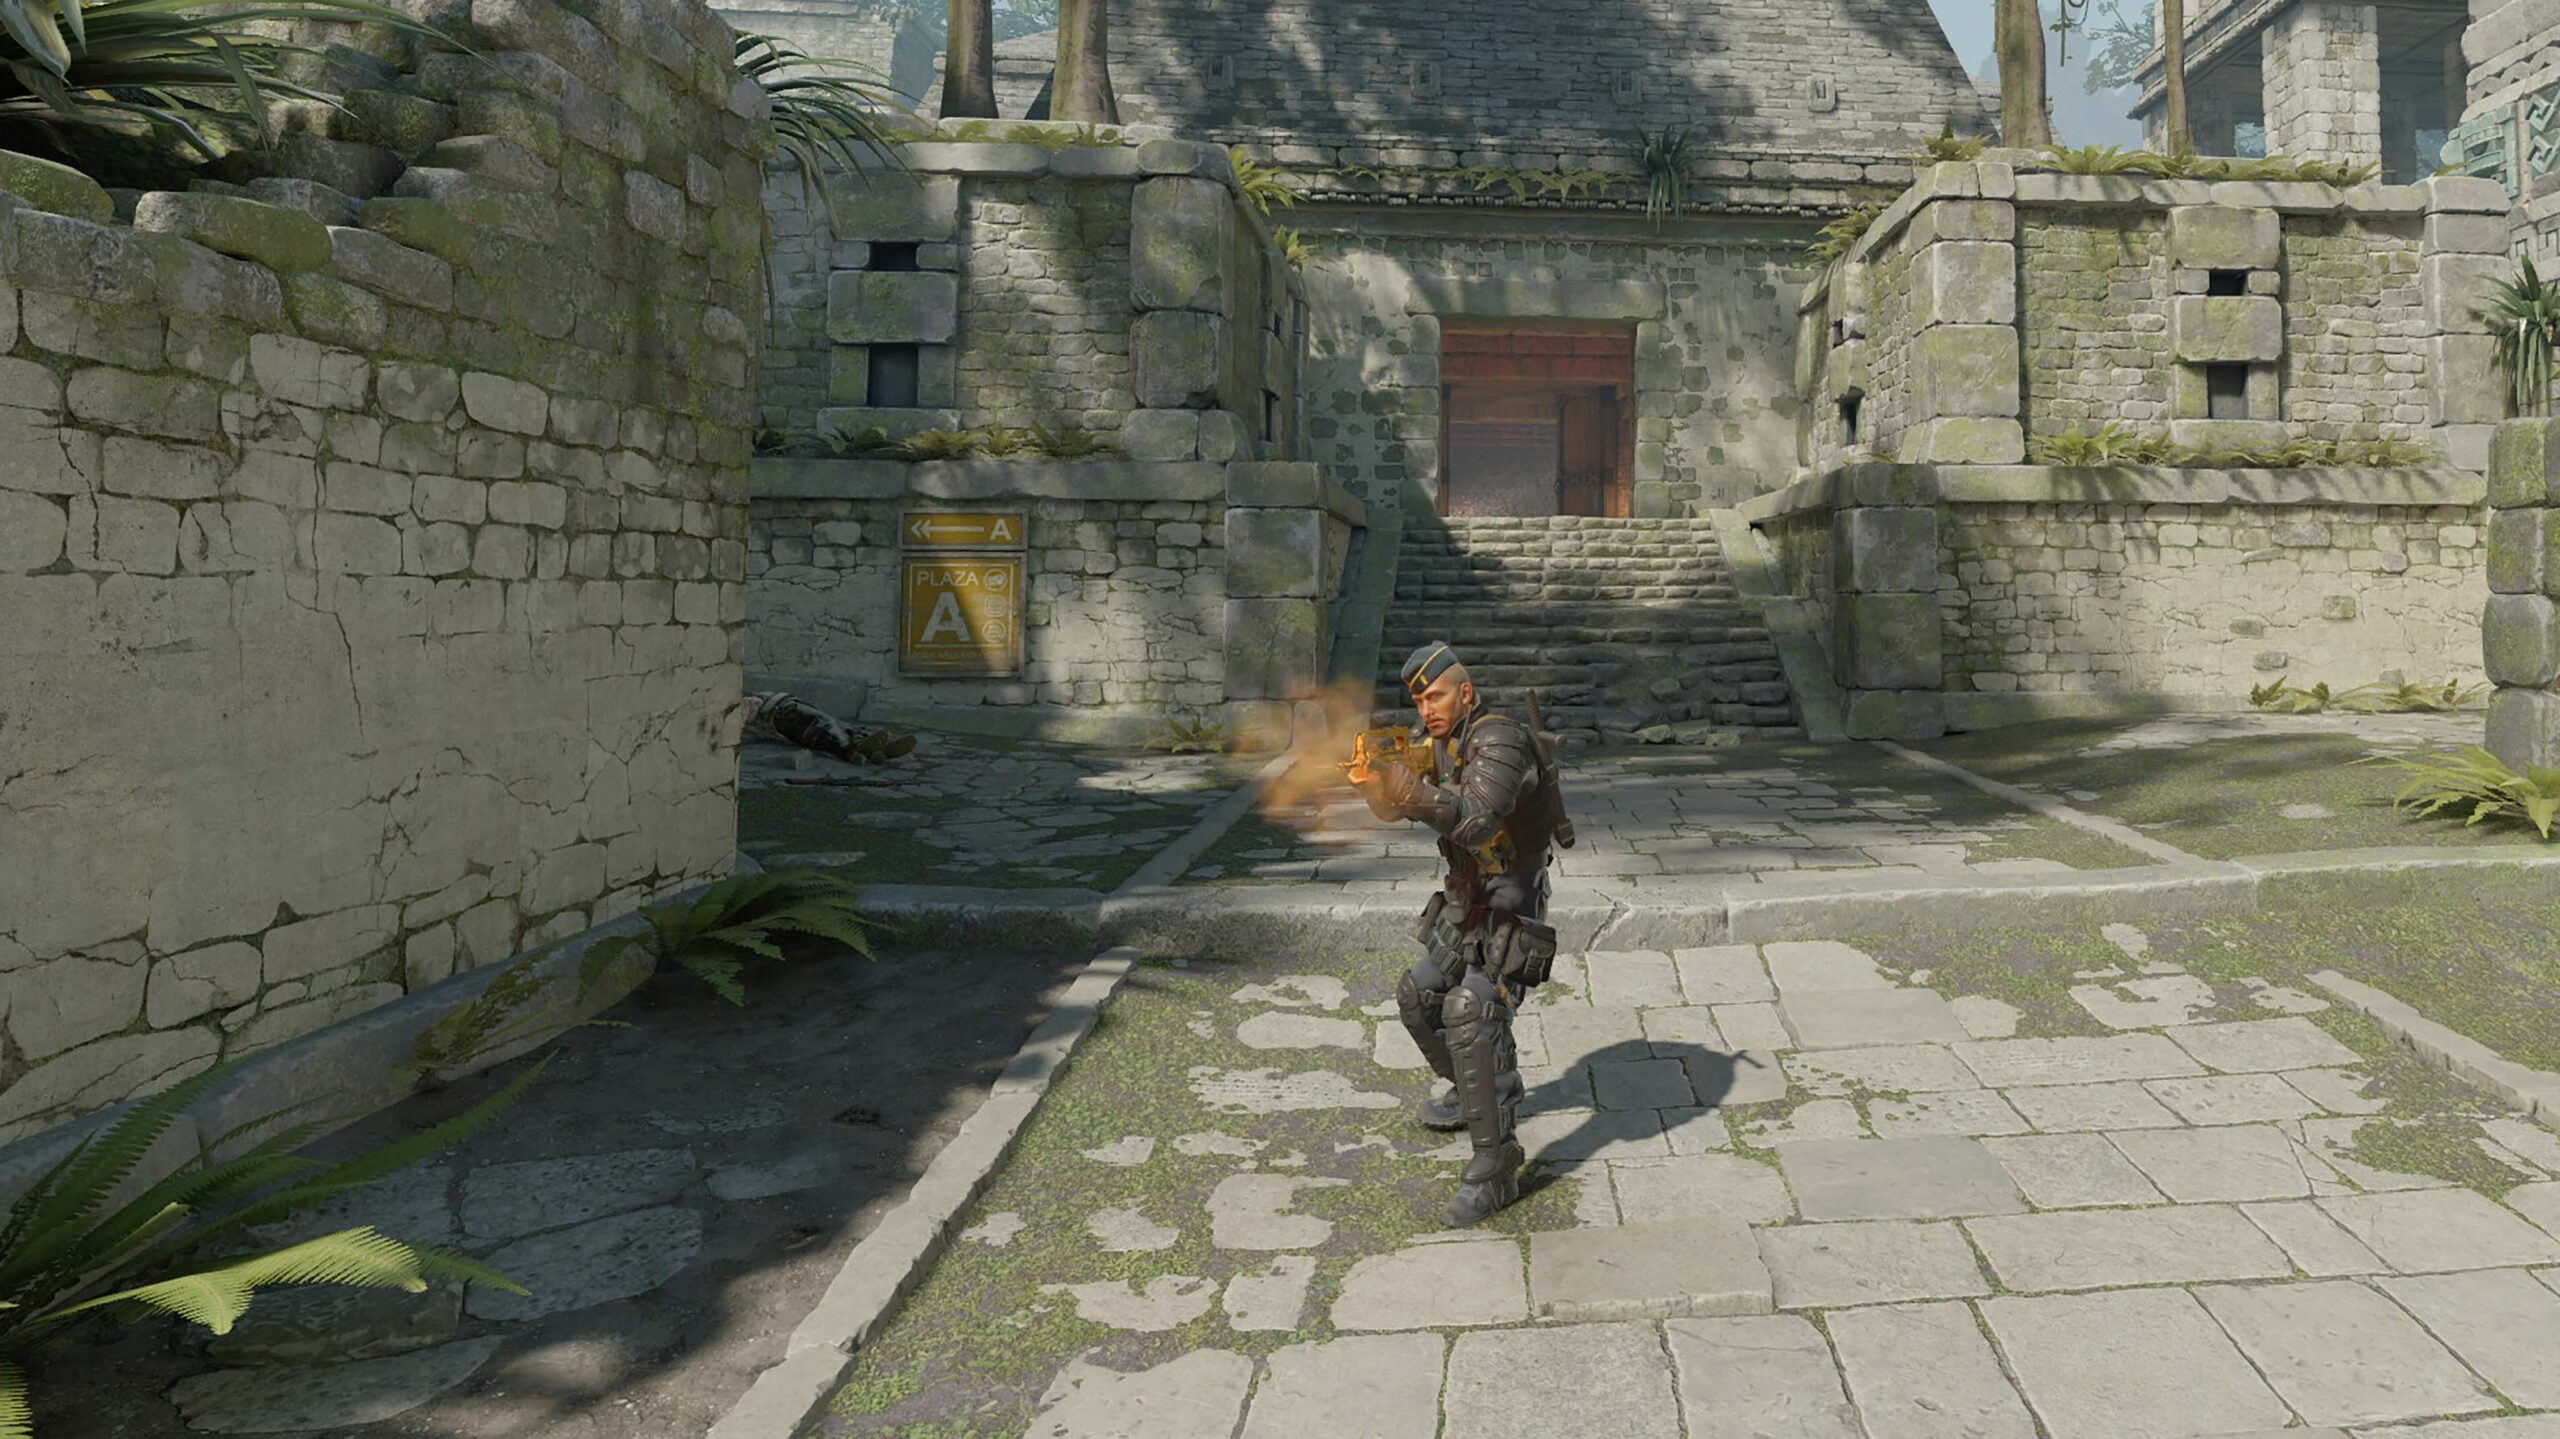 Counter-Strike 2 Gameplay Footage Revealed; Limited Tests